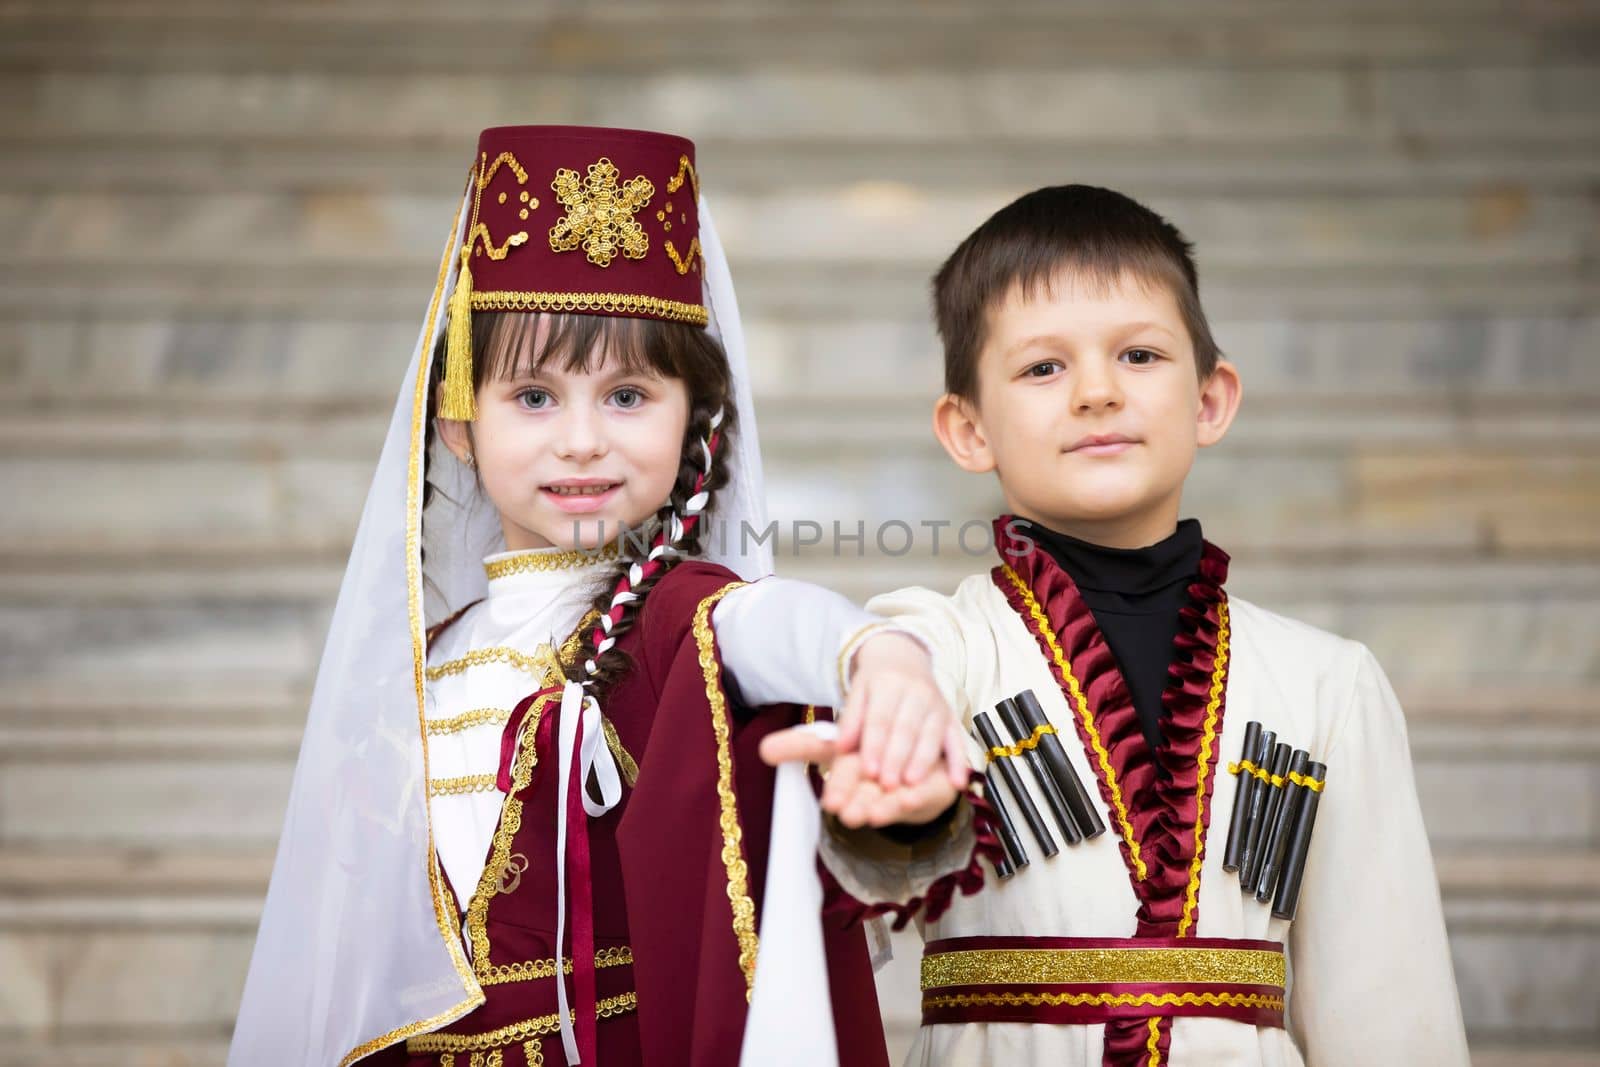 Belarus, city of Gomel, May 21, 2021 Children's holiday in the city. A boy and a girl in national Georgian clothes. by Sviatlana